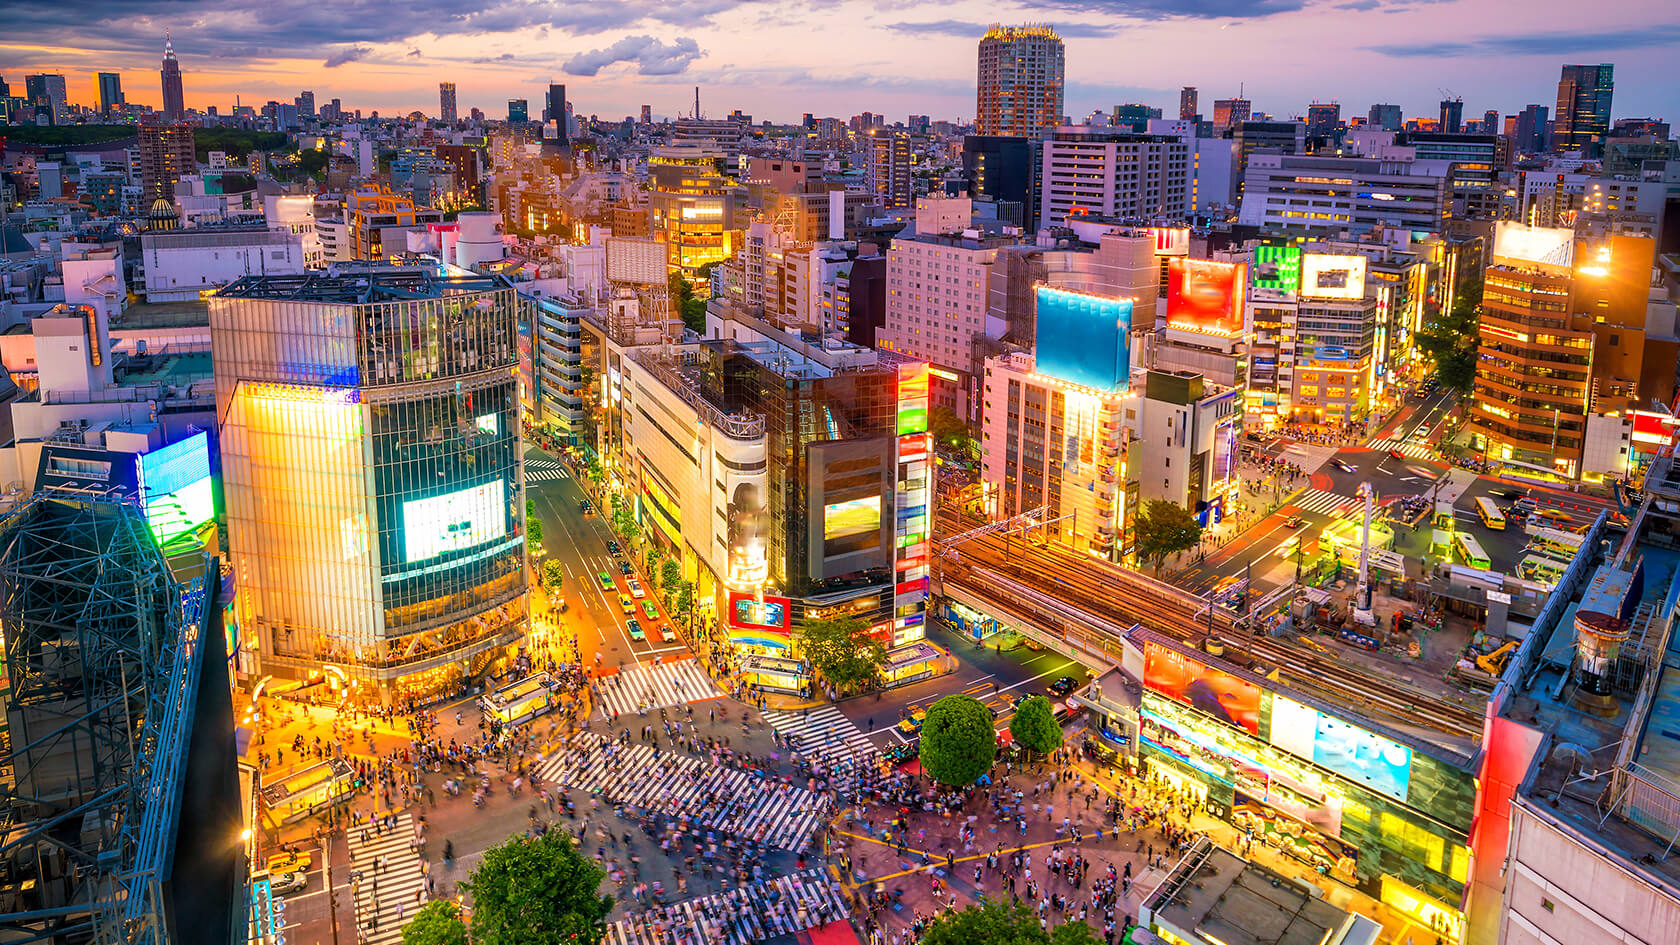 Learning The History Of Shibuya Japan S Popular Entertainment Shopping District Motto Japan Media Japanese Culture Living In Japan